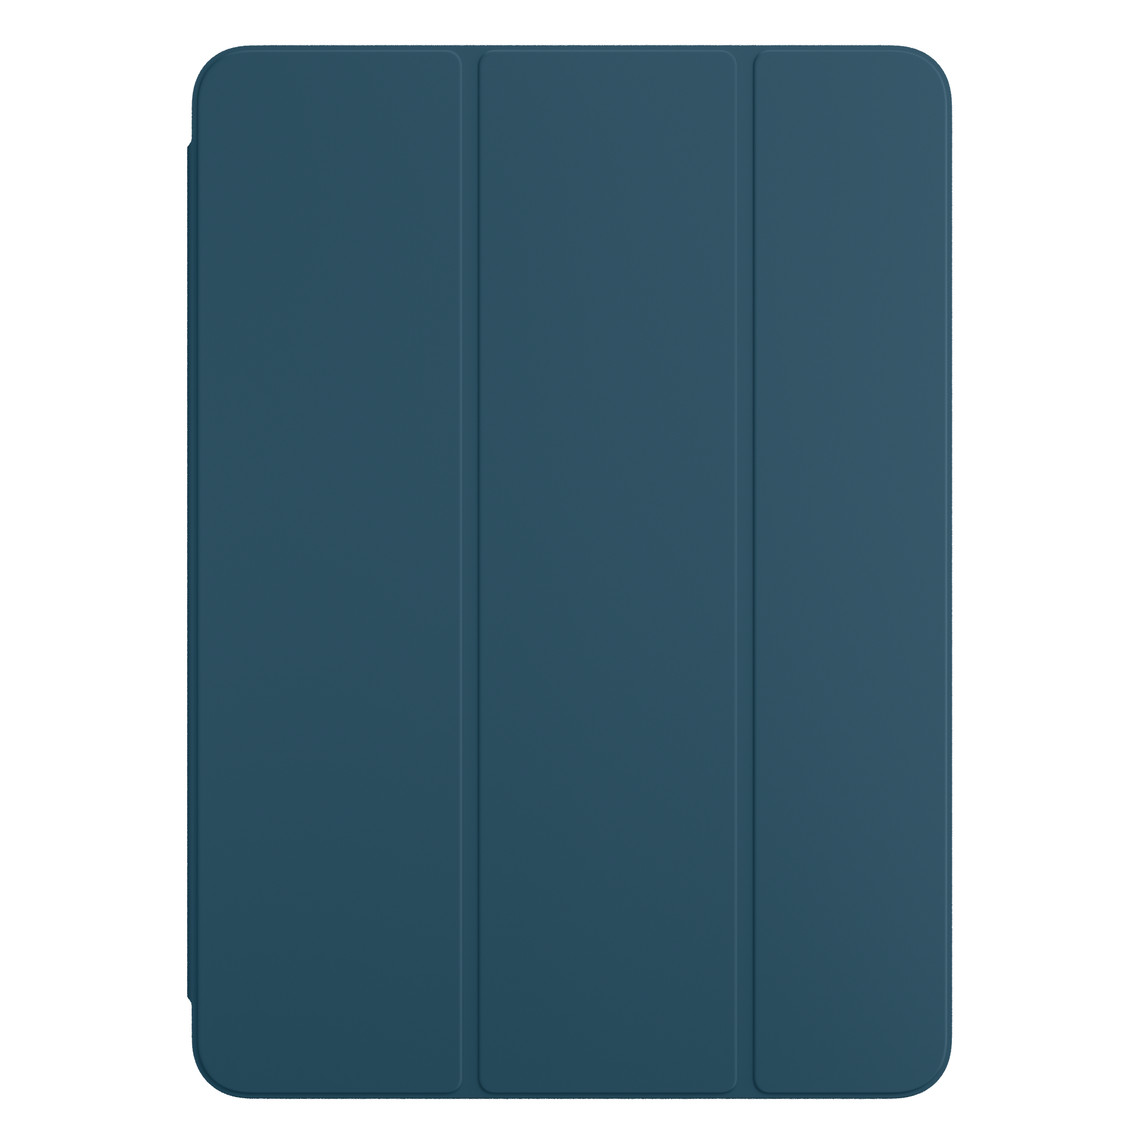 Front view of Marine Blue Smart Folio for iPad Pro.